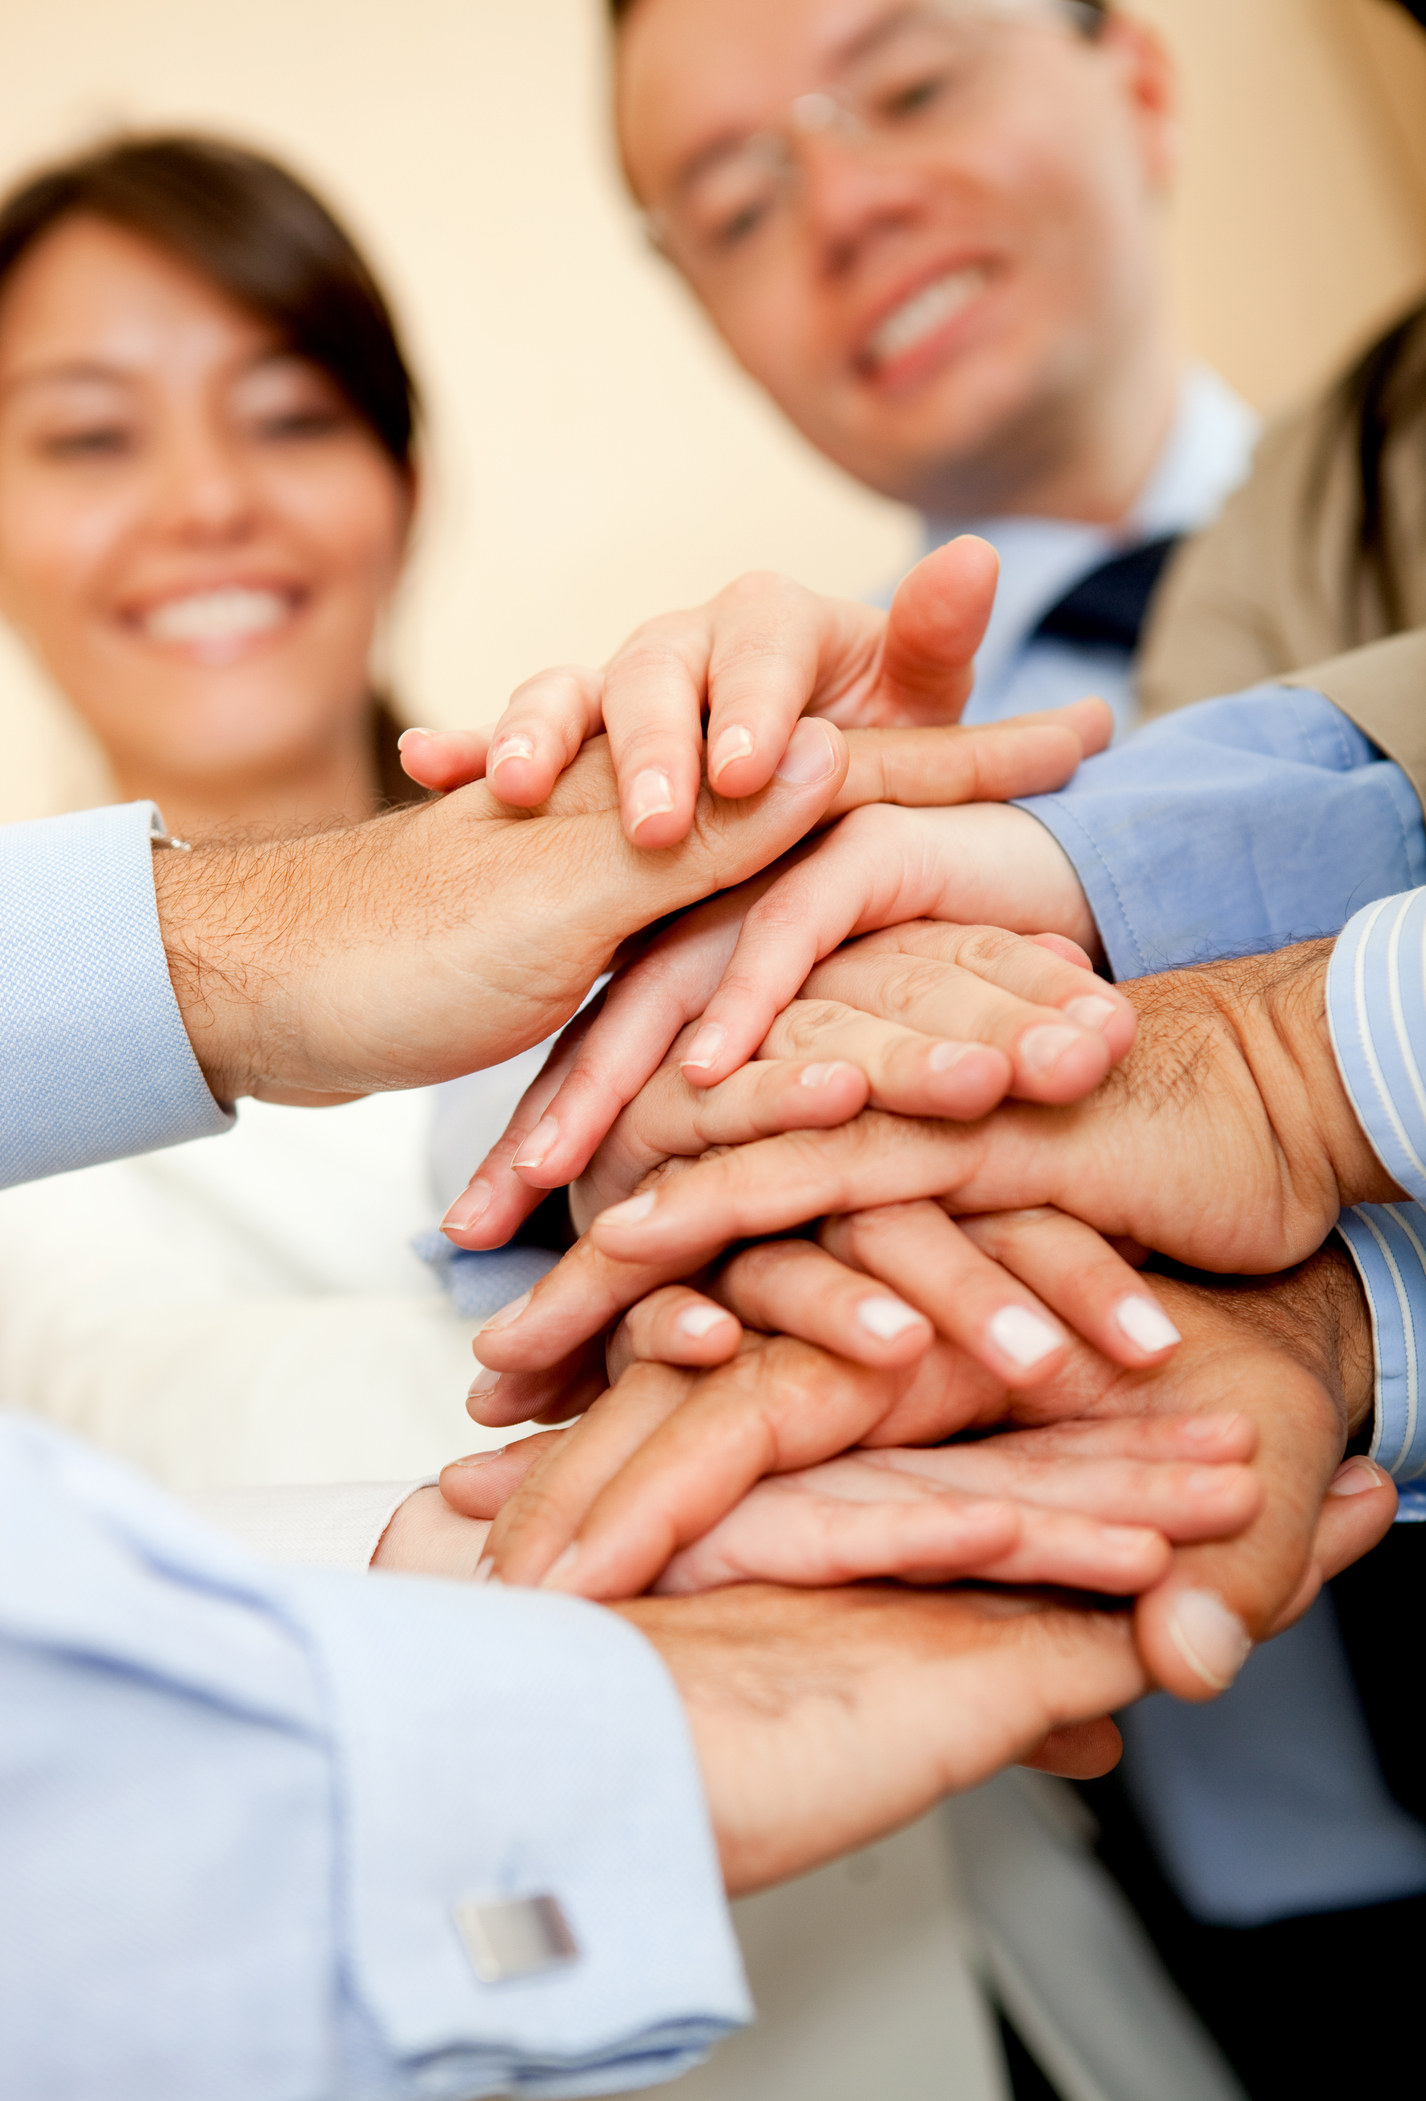 Employee Engagement: All About The Team